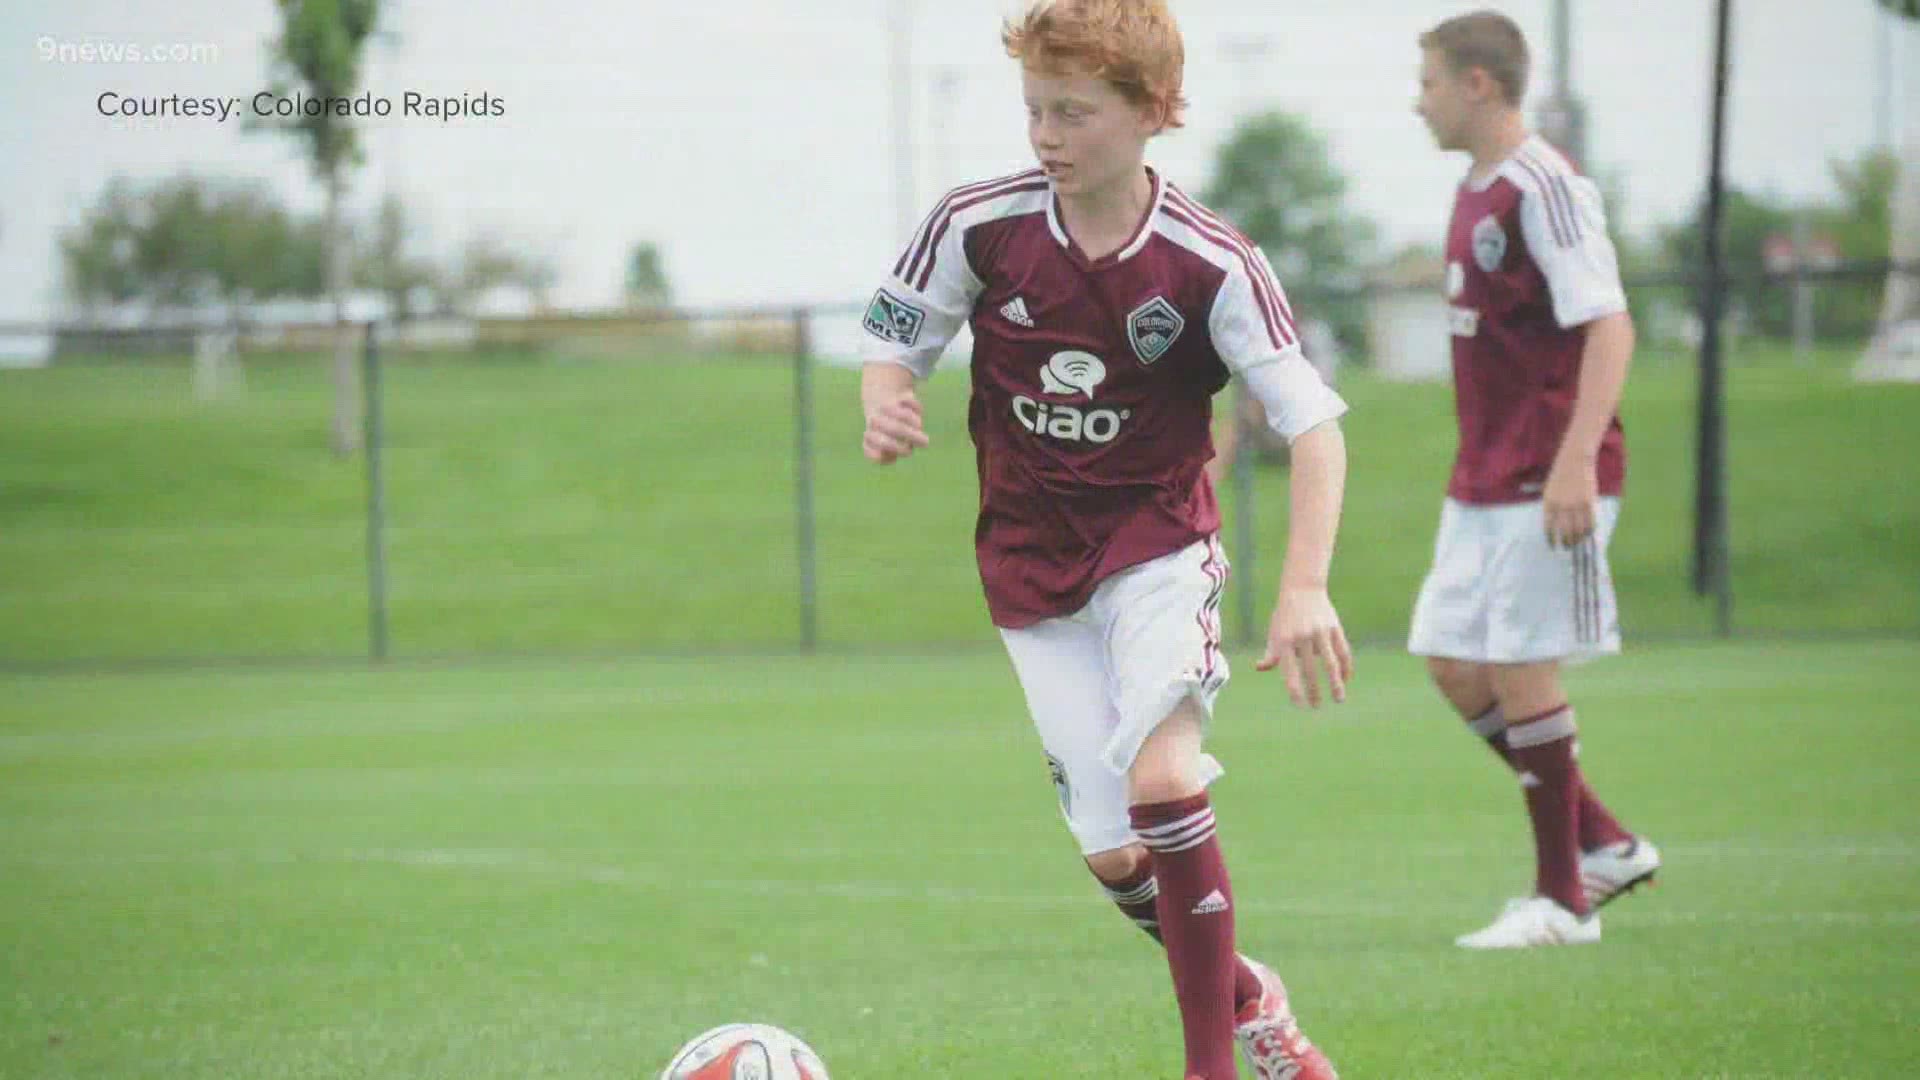 Larraz has been involved with the Colorado Rapids since he was 9 years old, both as an academy player and an occasional ball boy.